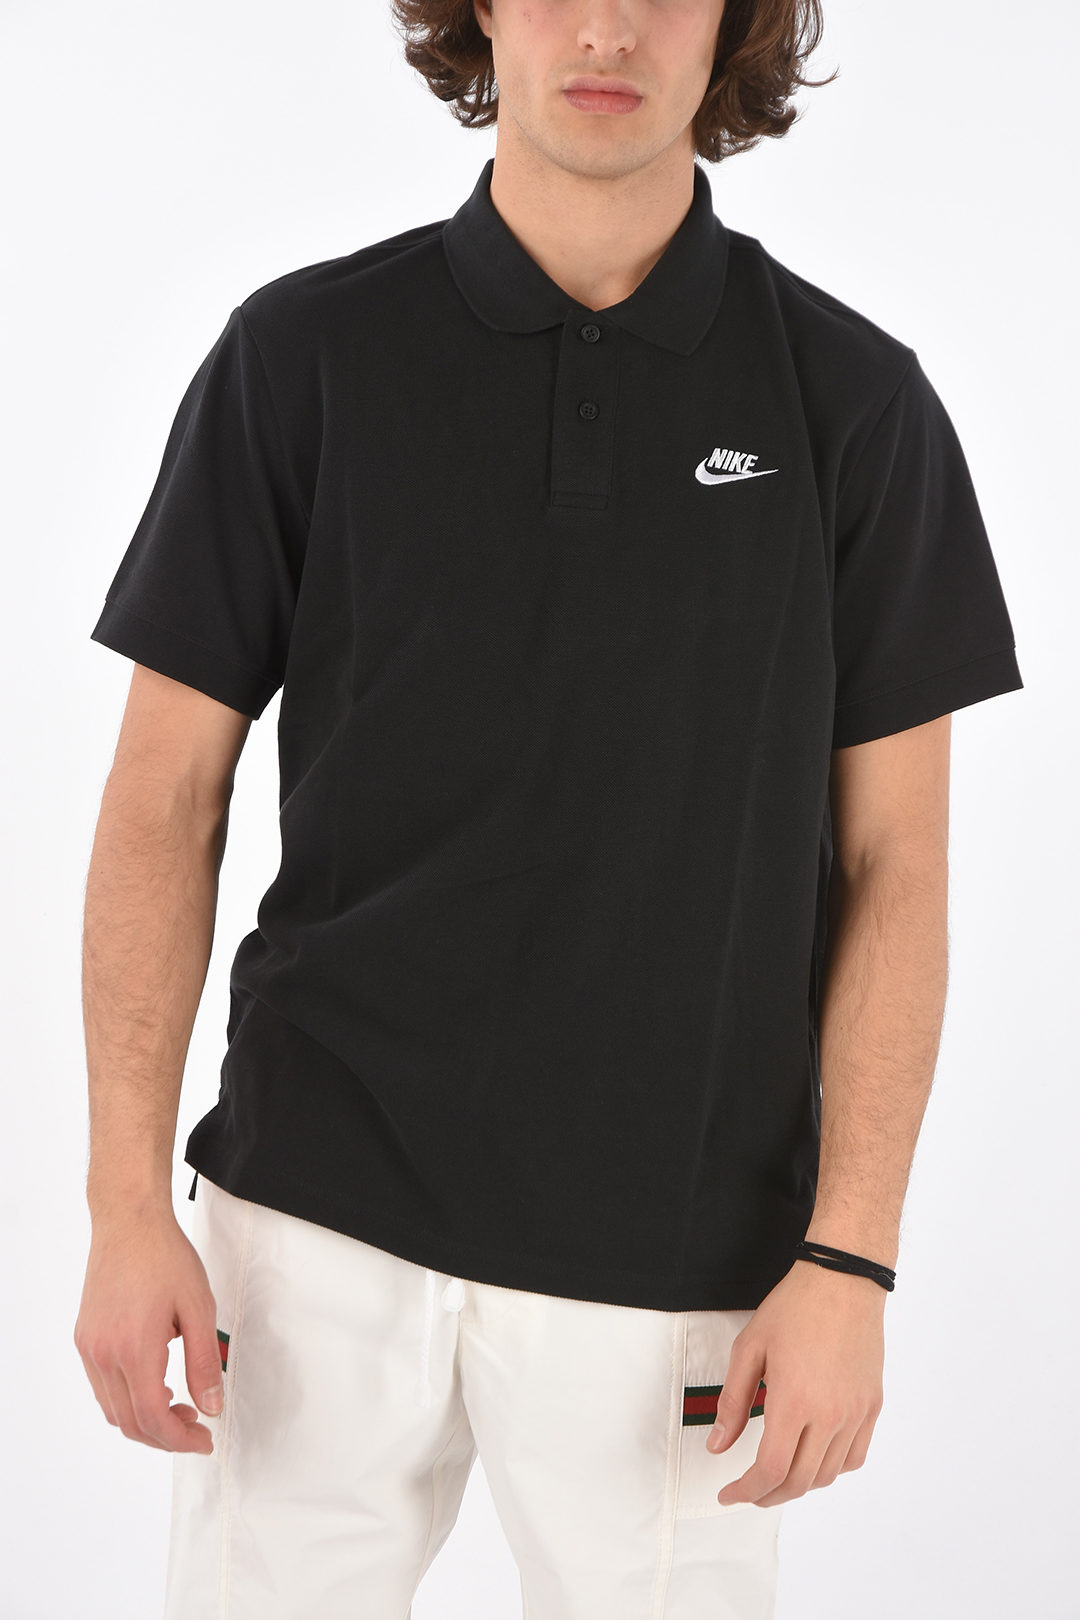 muis of rat vacht terwijl Nike Piquè cotton Logo Embroidered Polo men - Glamood Outlet